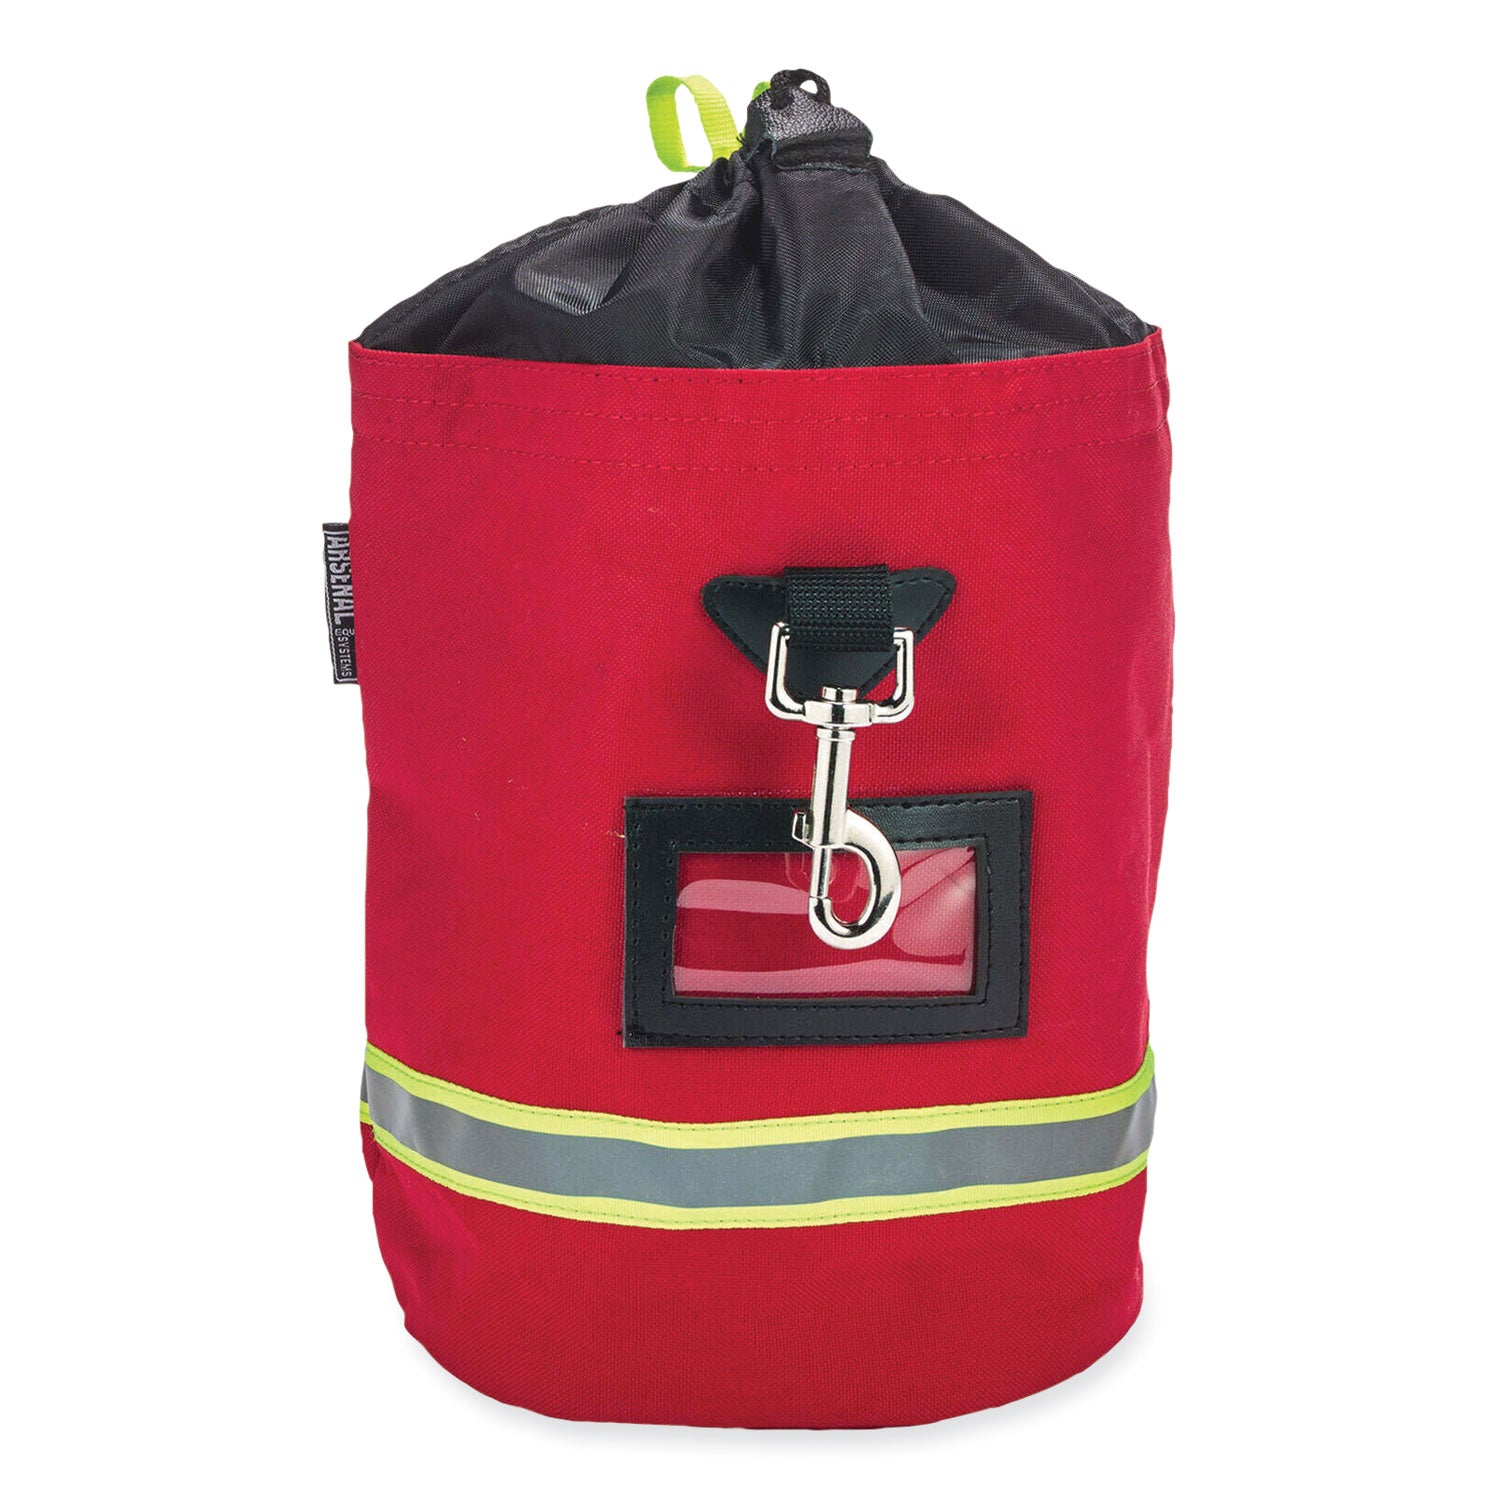 arsenal-5080-scba-mask-bag-85-x-85-x-14-red-ships-in-1-3-business-days_ego13080 - 2